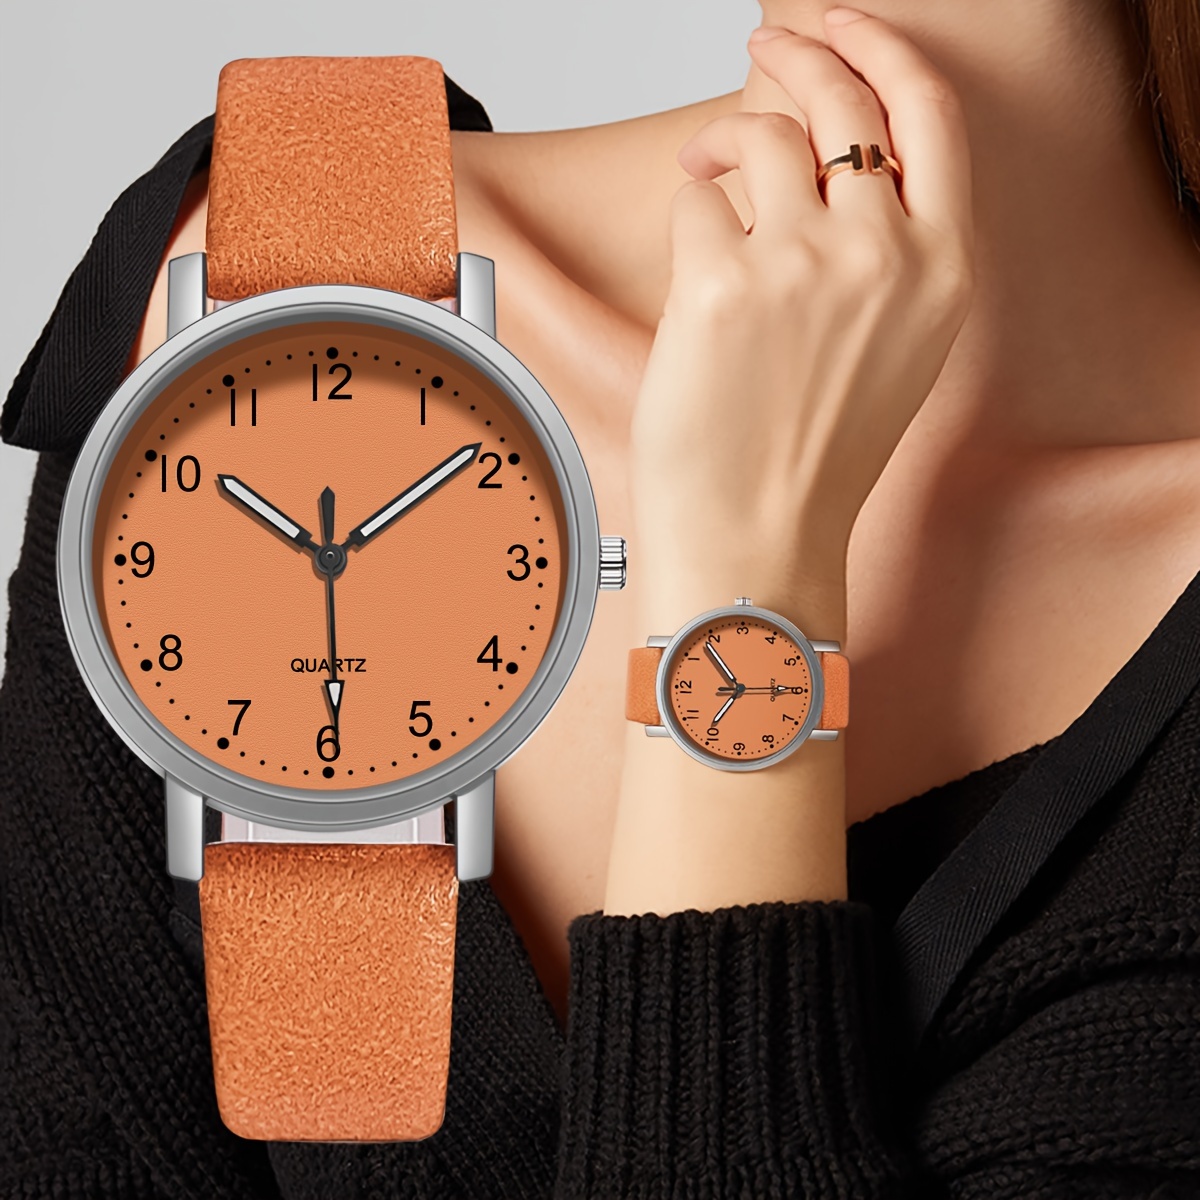 

Vintage Style Women's Quartz Wrist Watch With Pu Leather Band, Round Plastic Case, Elegant Minimalist Design, Non-rechargeable Battery - Fashionable Timepiece With Pointer Display